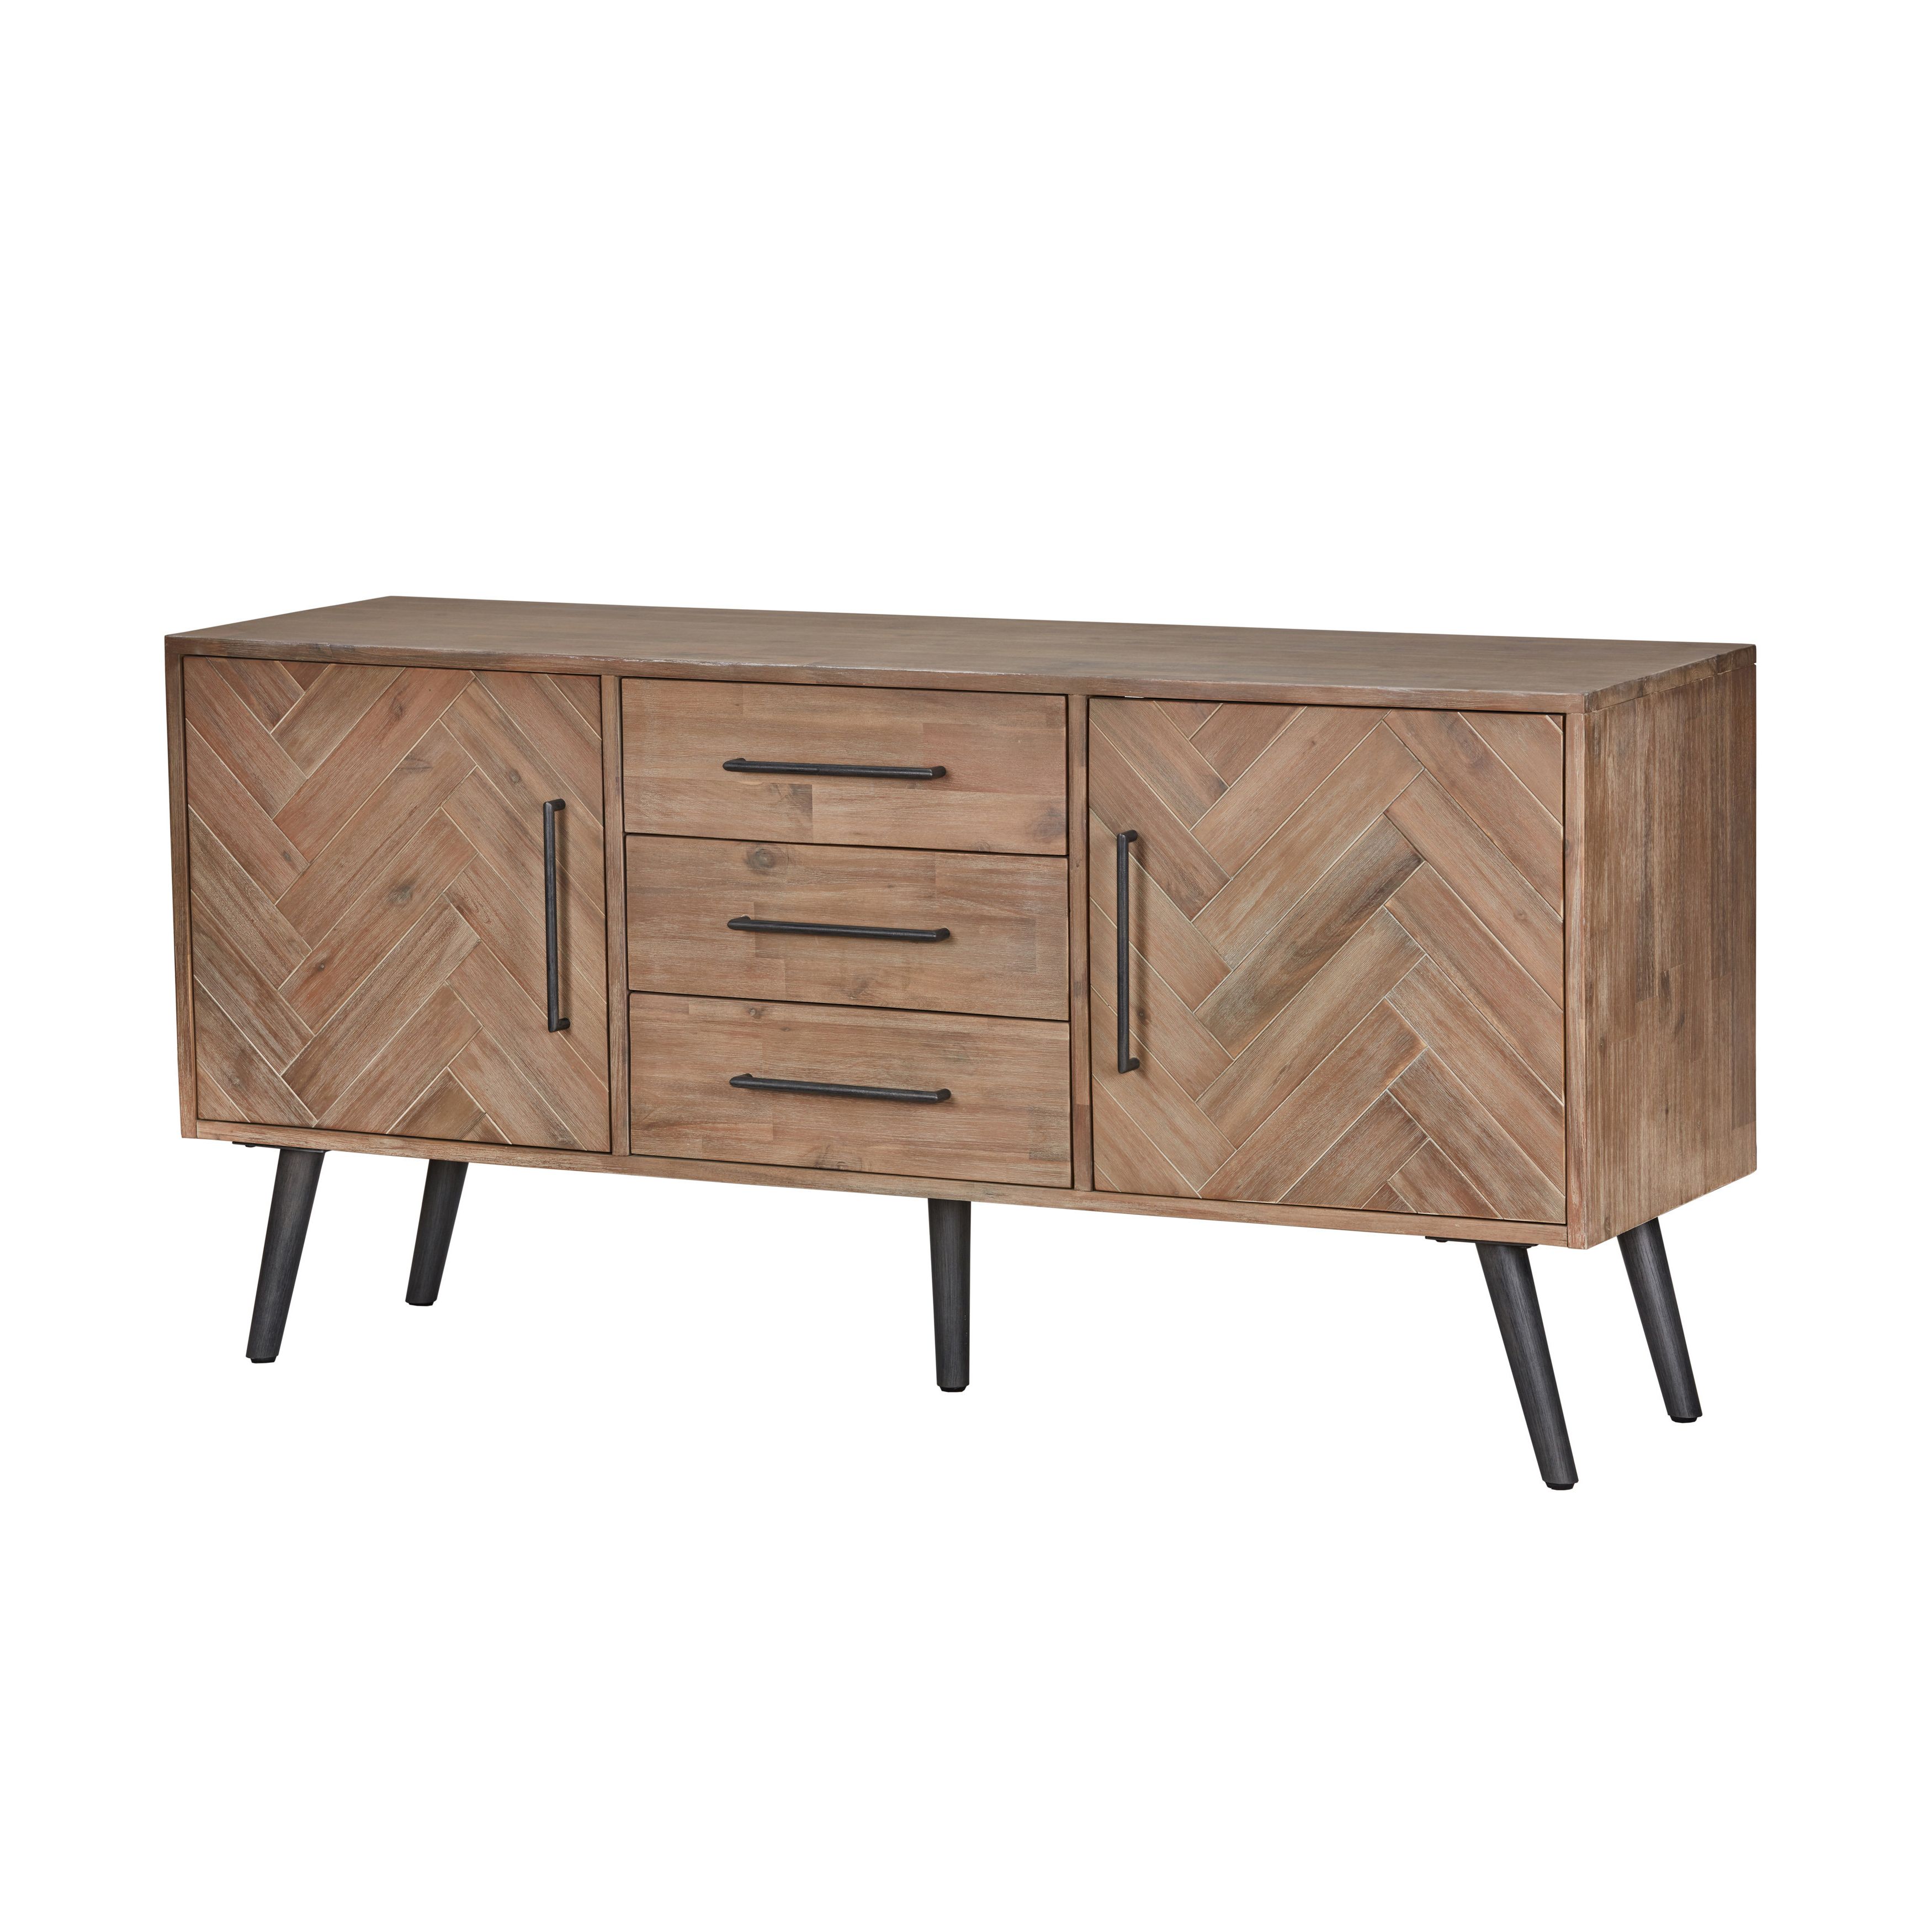 Wayfair With Barr Credenzas (View 3 of 20)